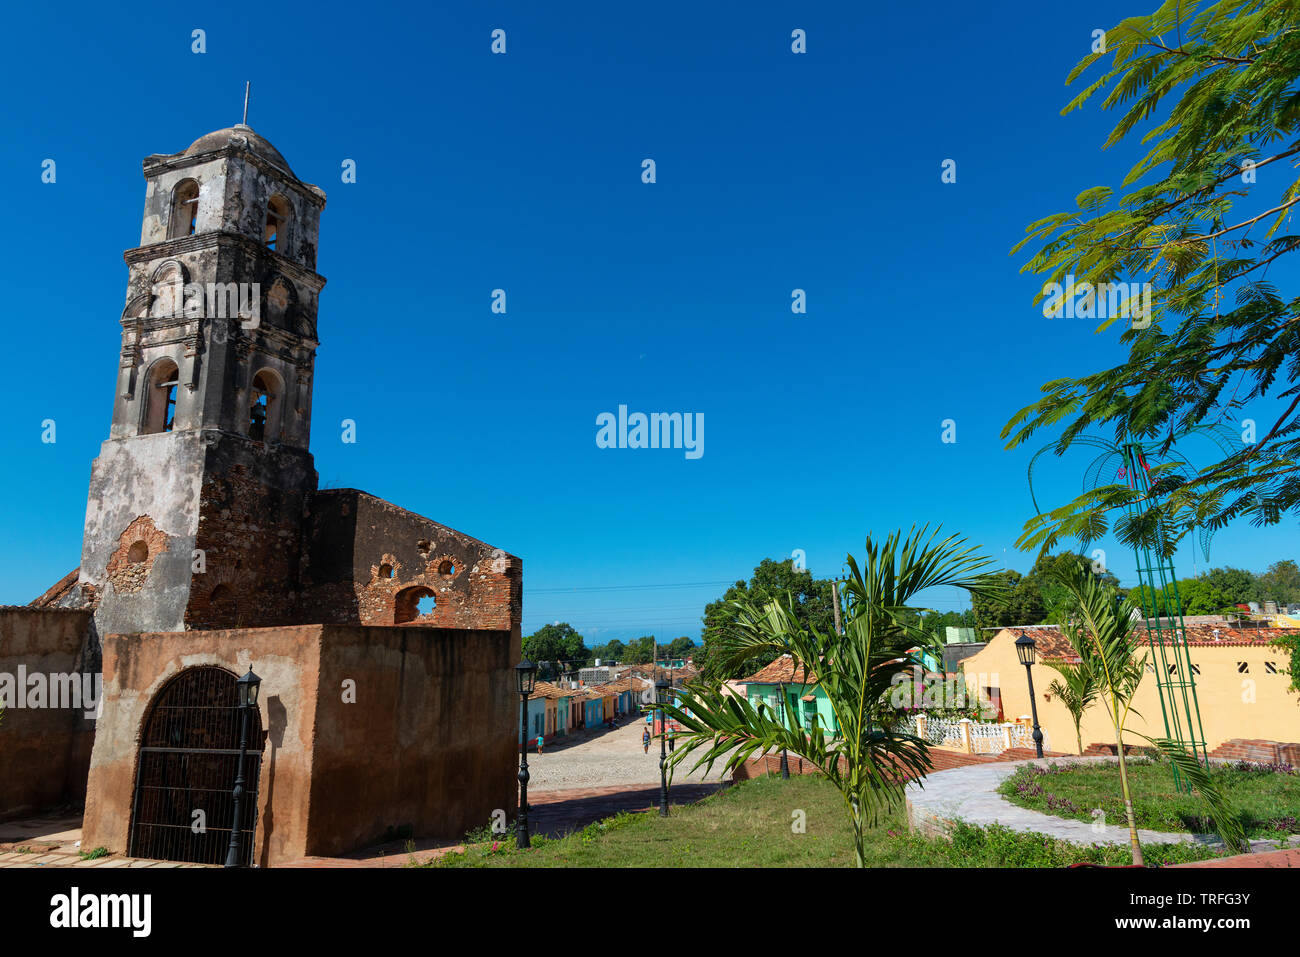 Old bell tower and street in the city of Trinidad, Sancti Spiritus Province, Cuba, Caribbean Stock Photo